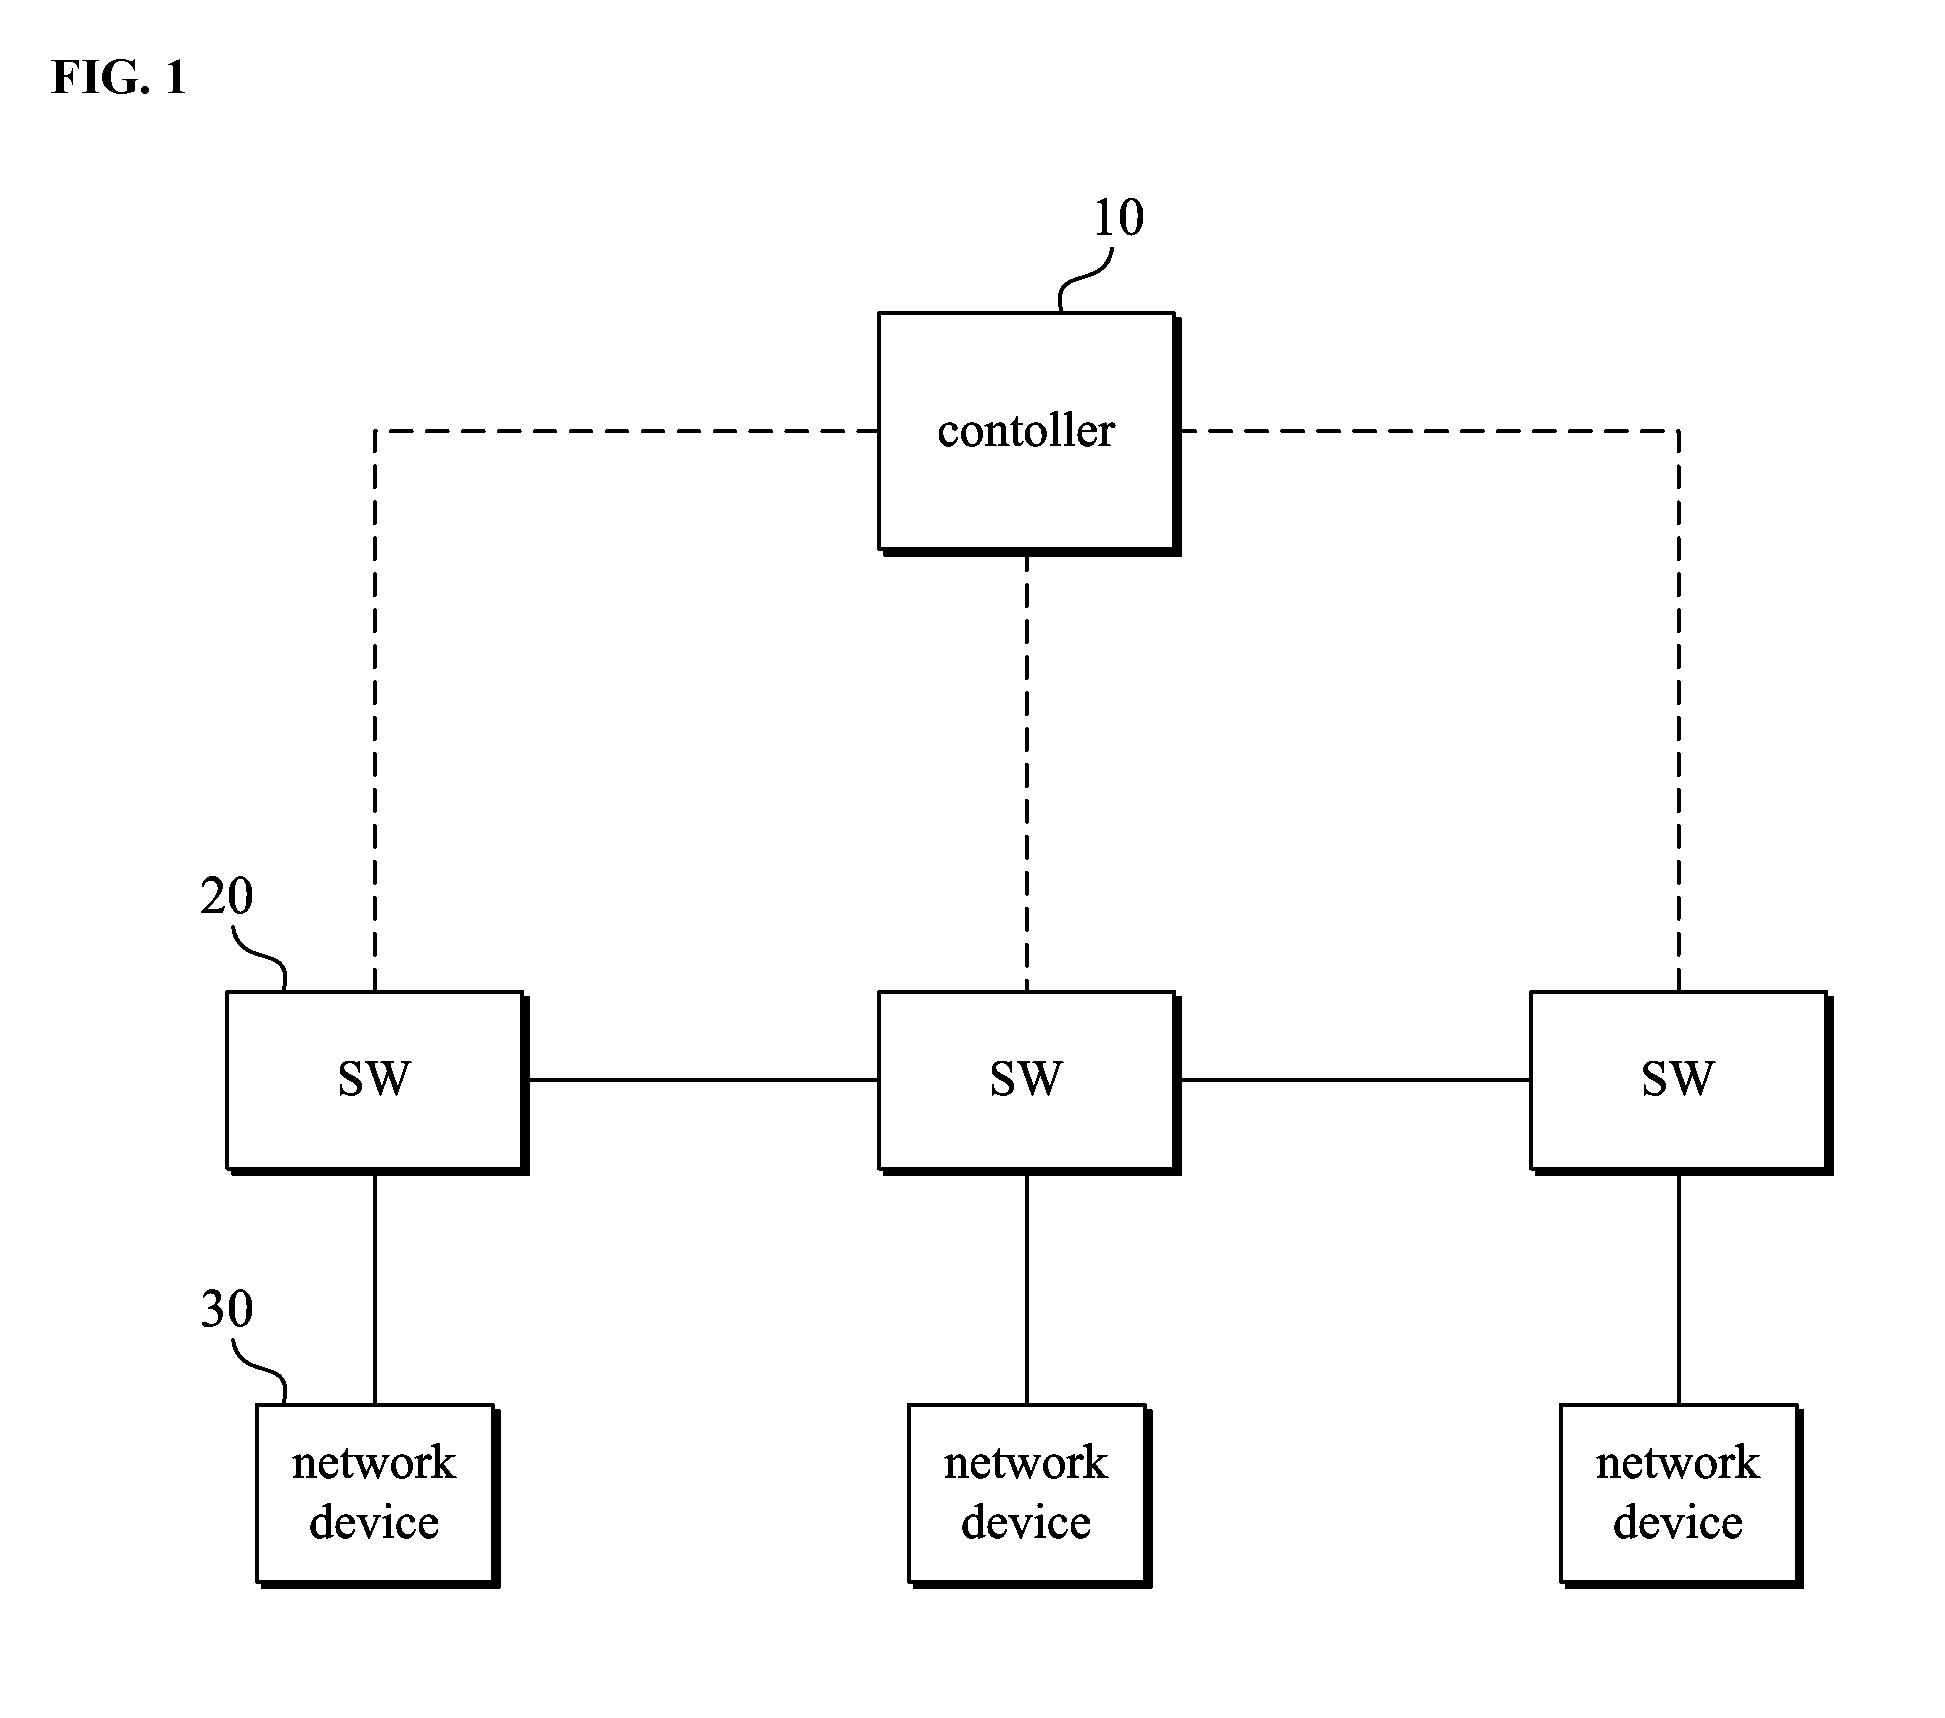 Sdn-based service chaining system